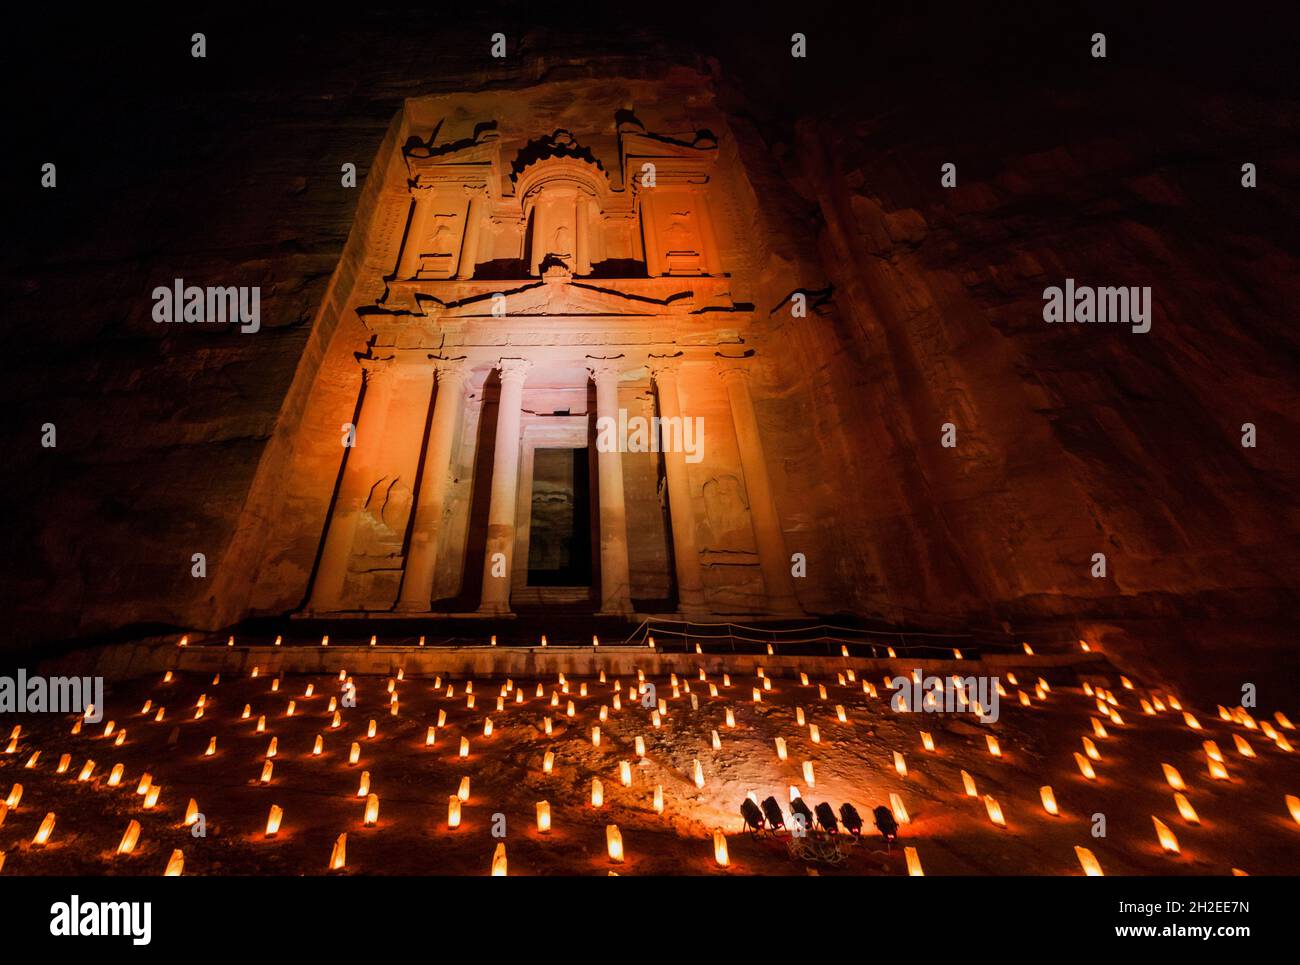 Candles in front of the Al Khazneh temple The Treasury in the ancient city Petra, Jordan Stock Photo